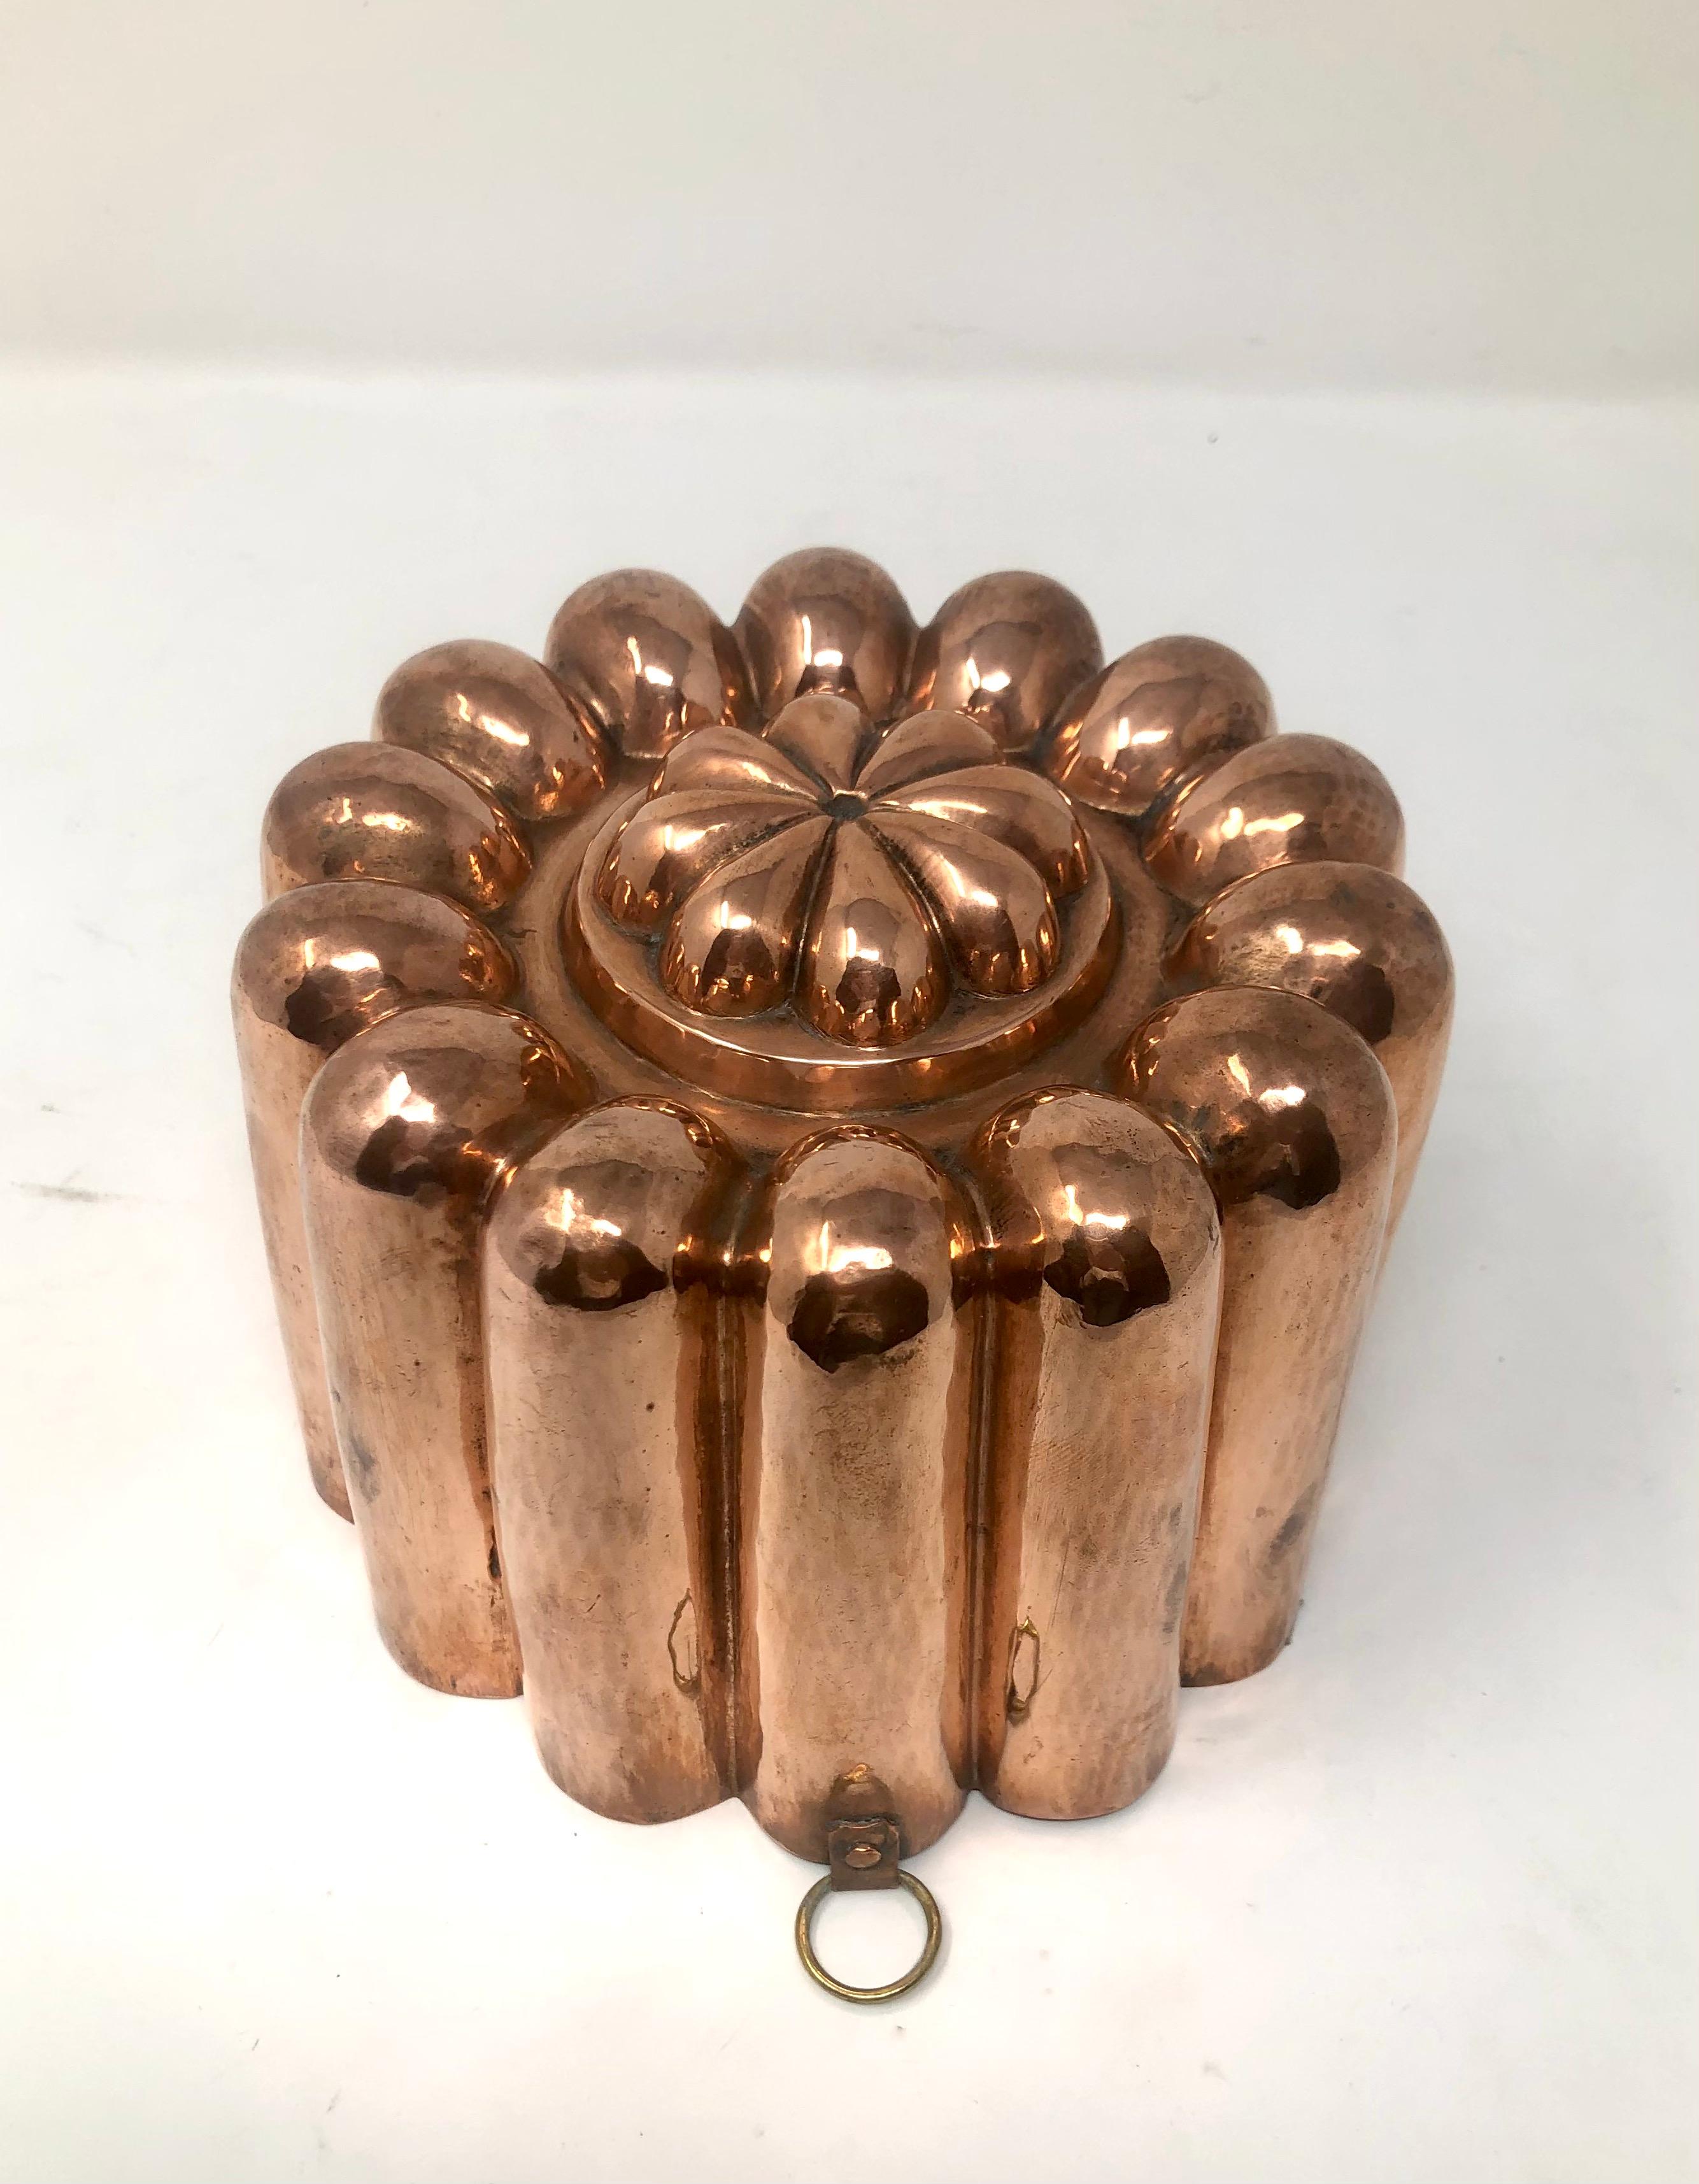 Antique french 19th century copper mold.